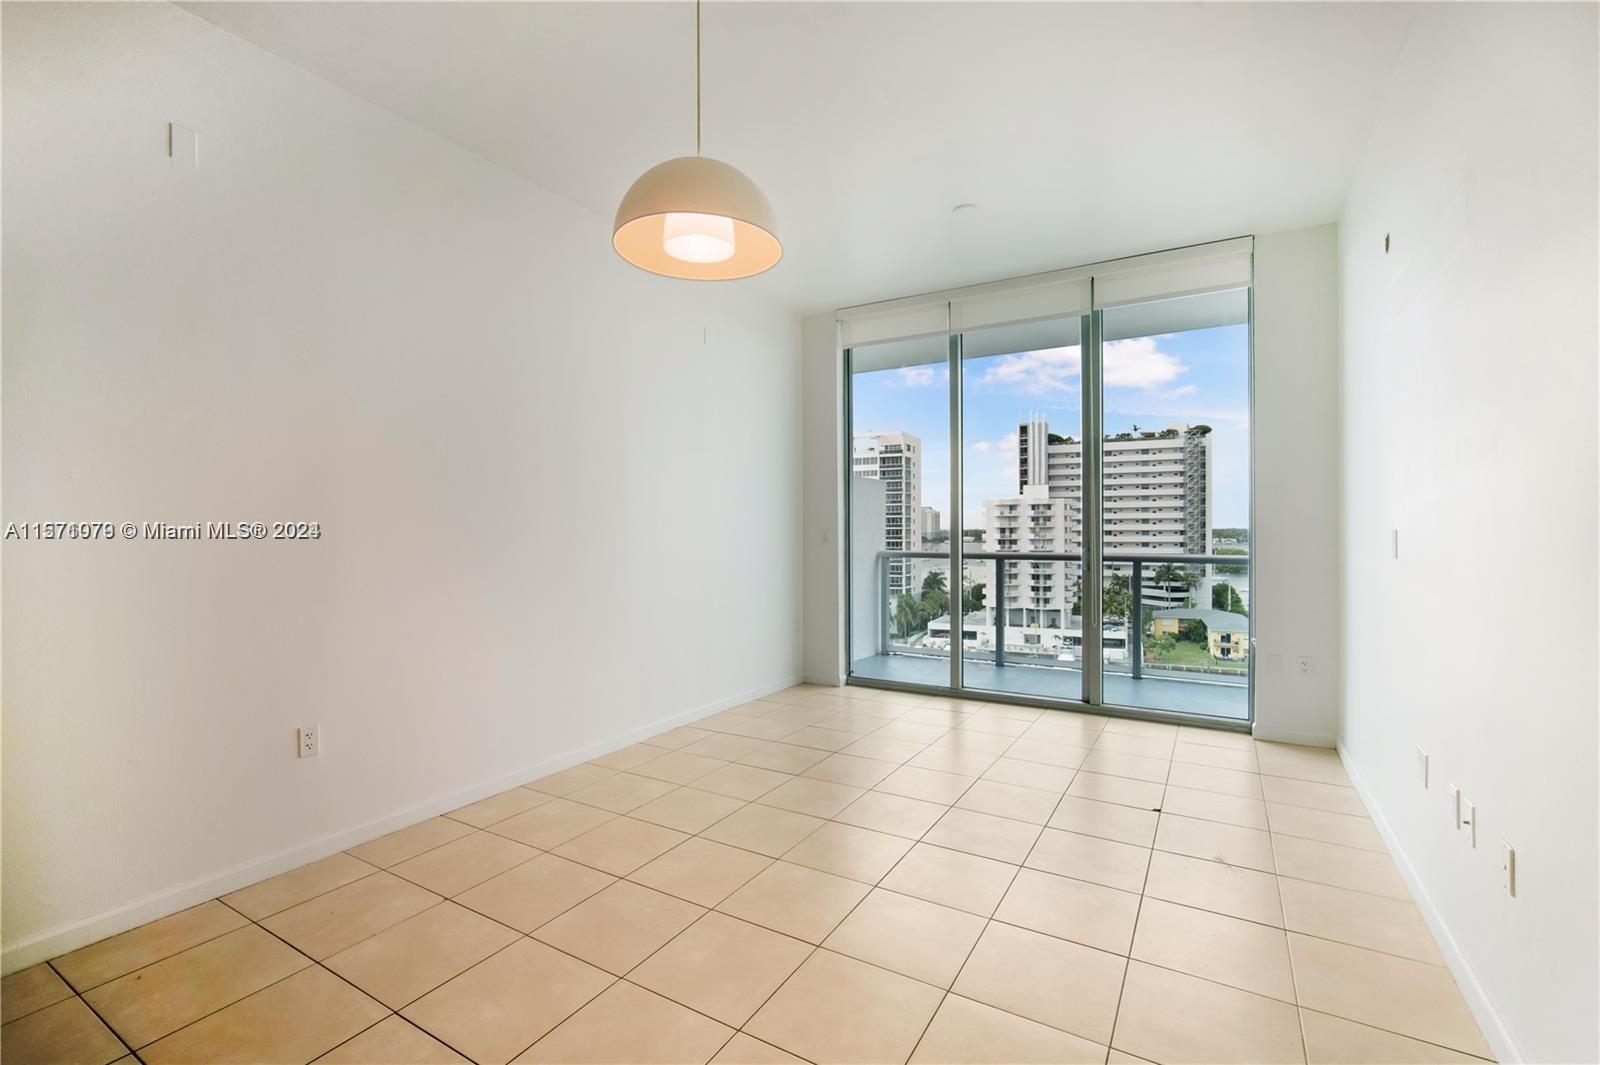 Photo of 7928 East Dr #903 in North Bay Village, FL